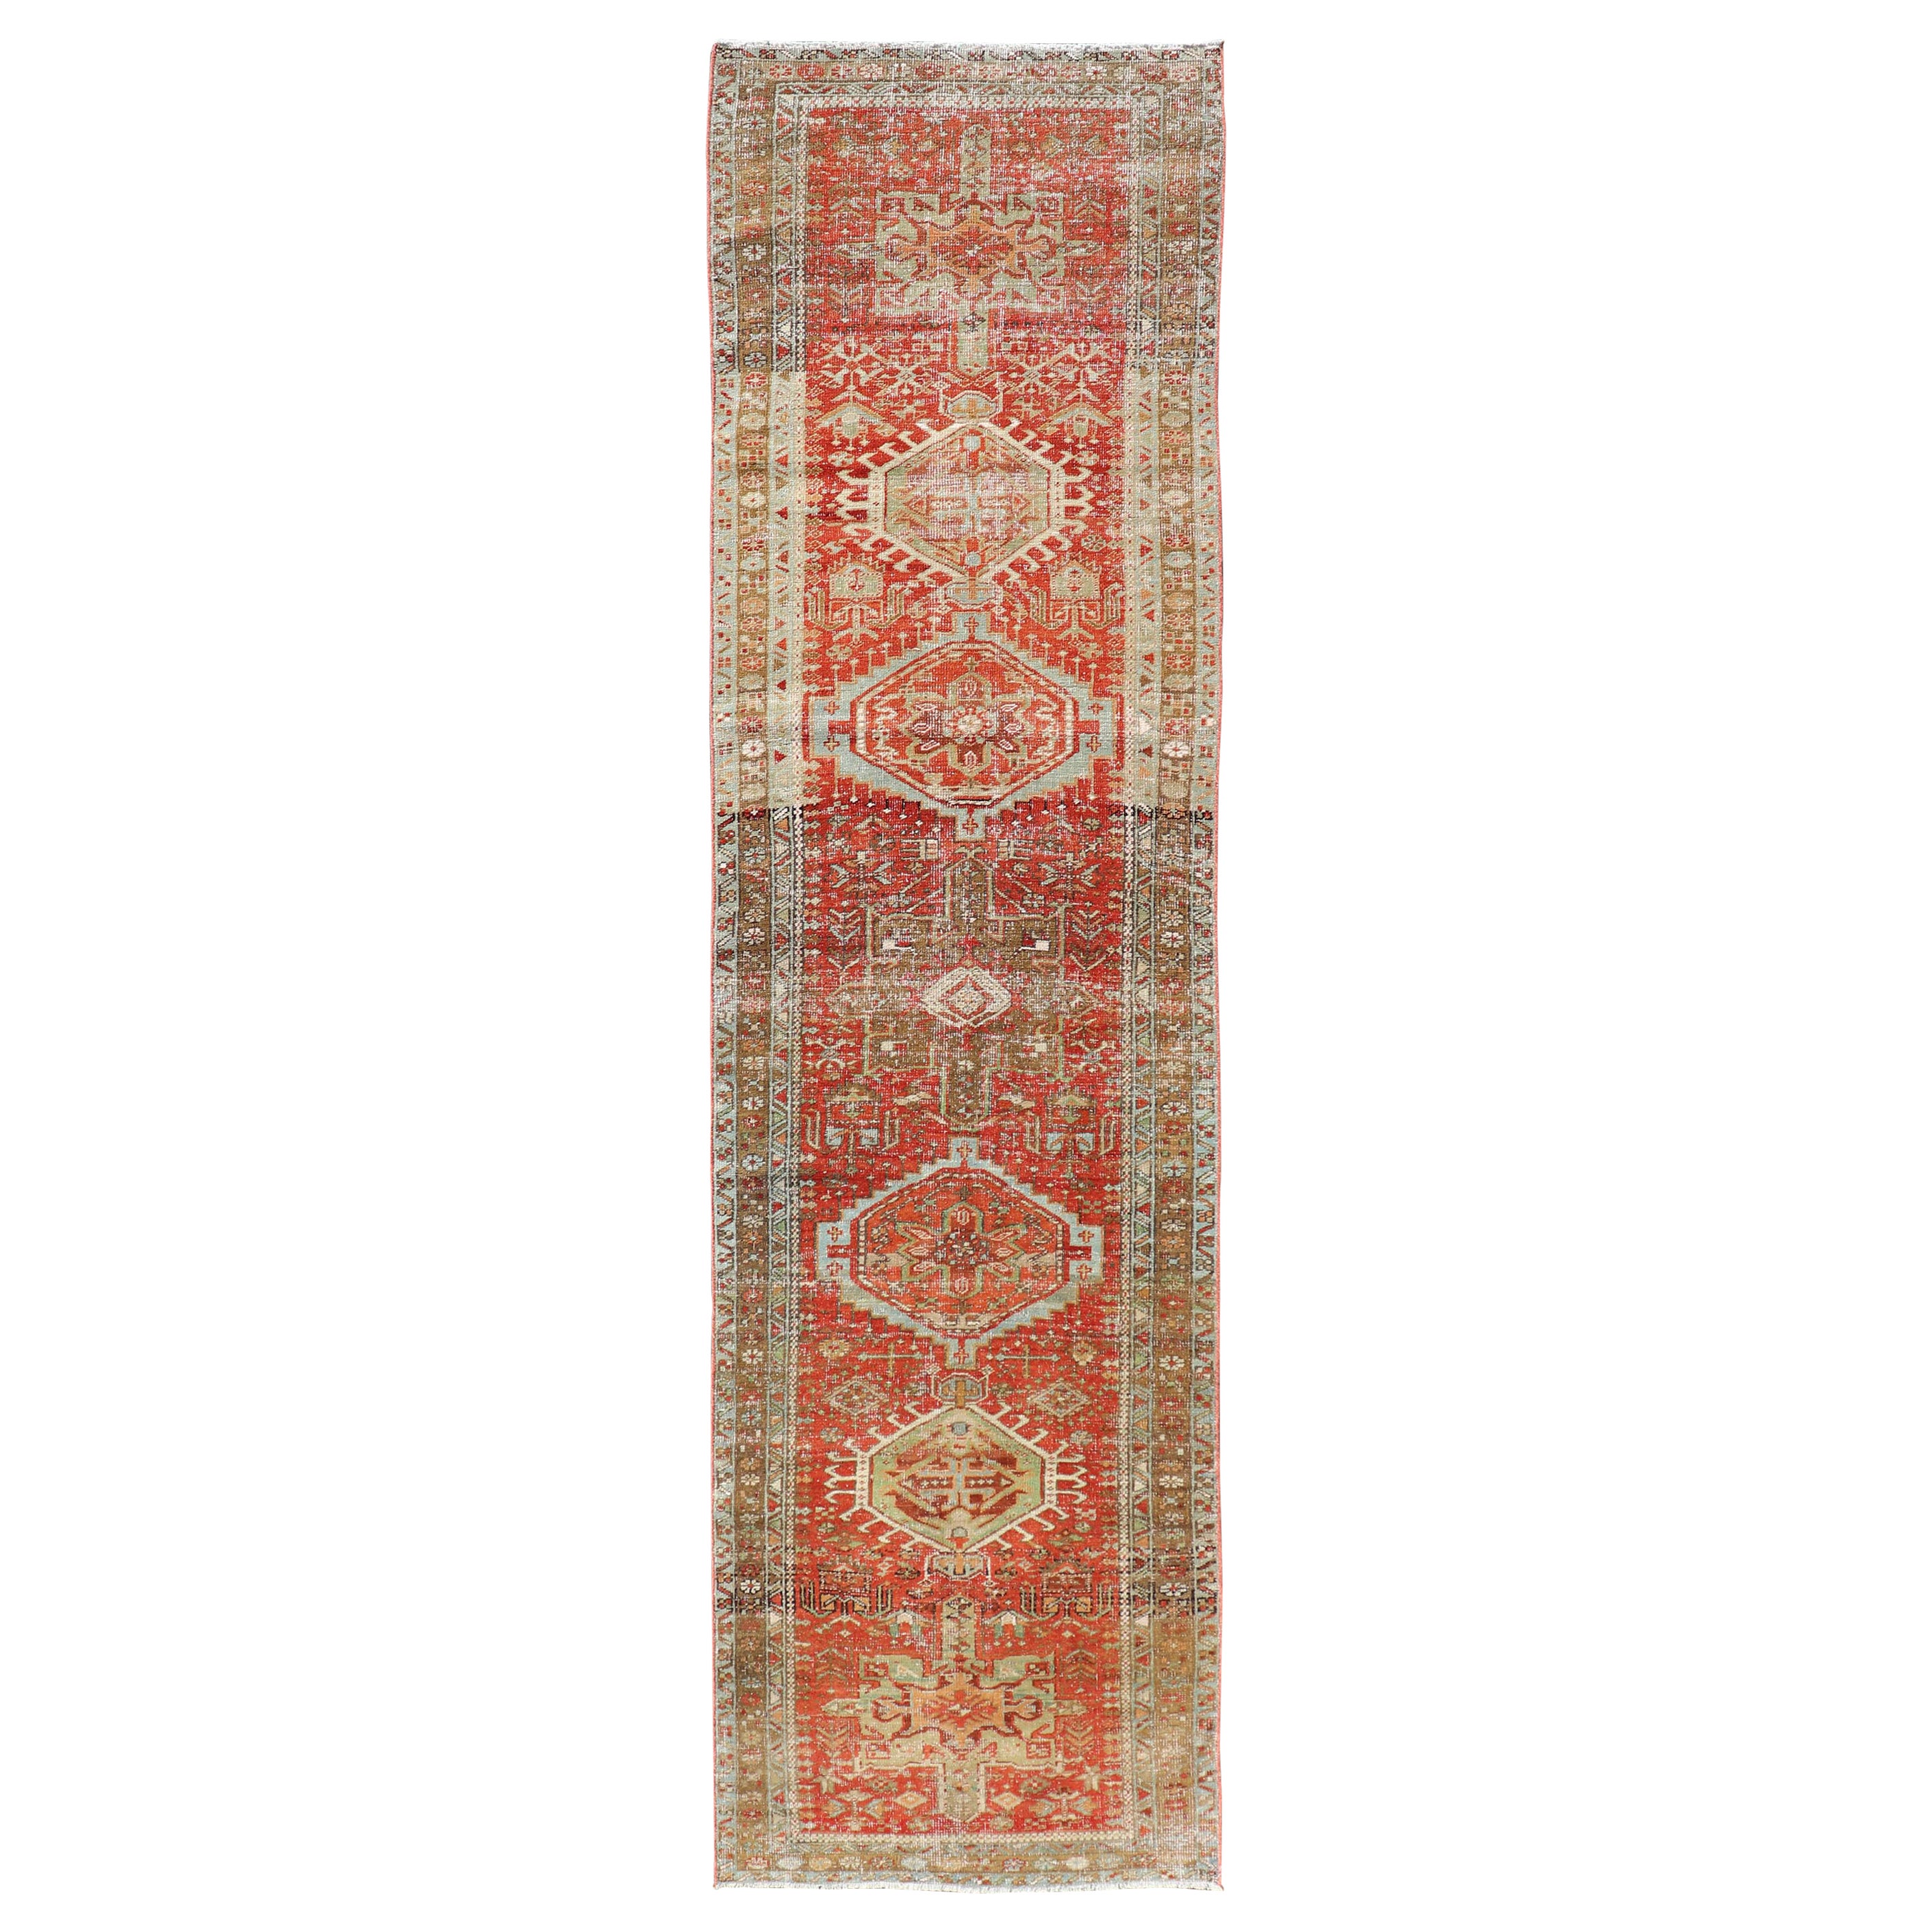 Antique Persian Heriz Distressed Runner with Geometric Medallions in Soft Colors